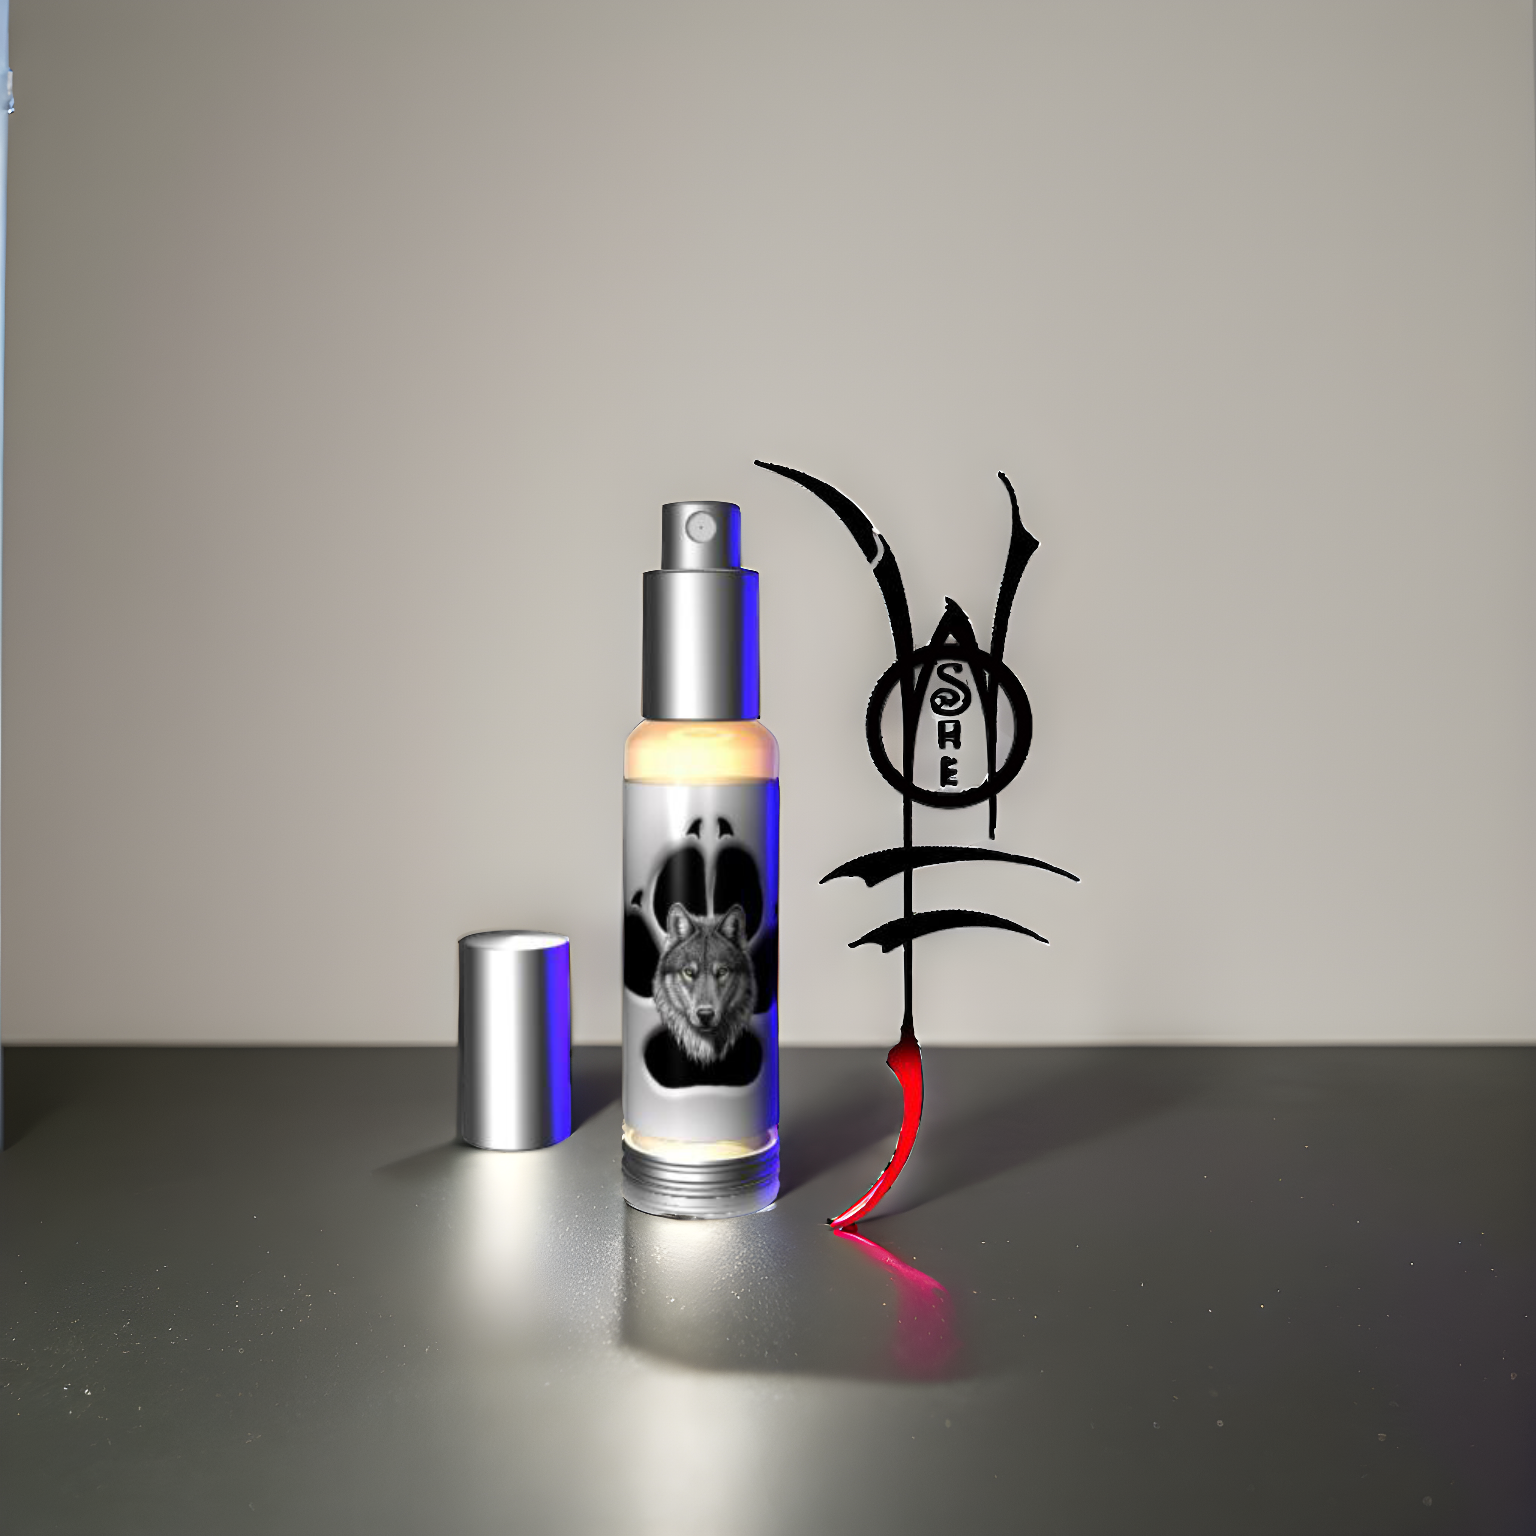 Bottle of SHE WOLF™ scented pheromone perfume for women, featuring a wolf design, by Royal Pheromones.